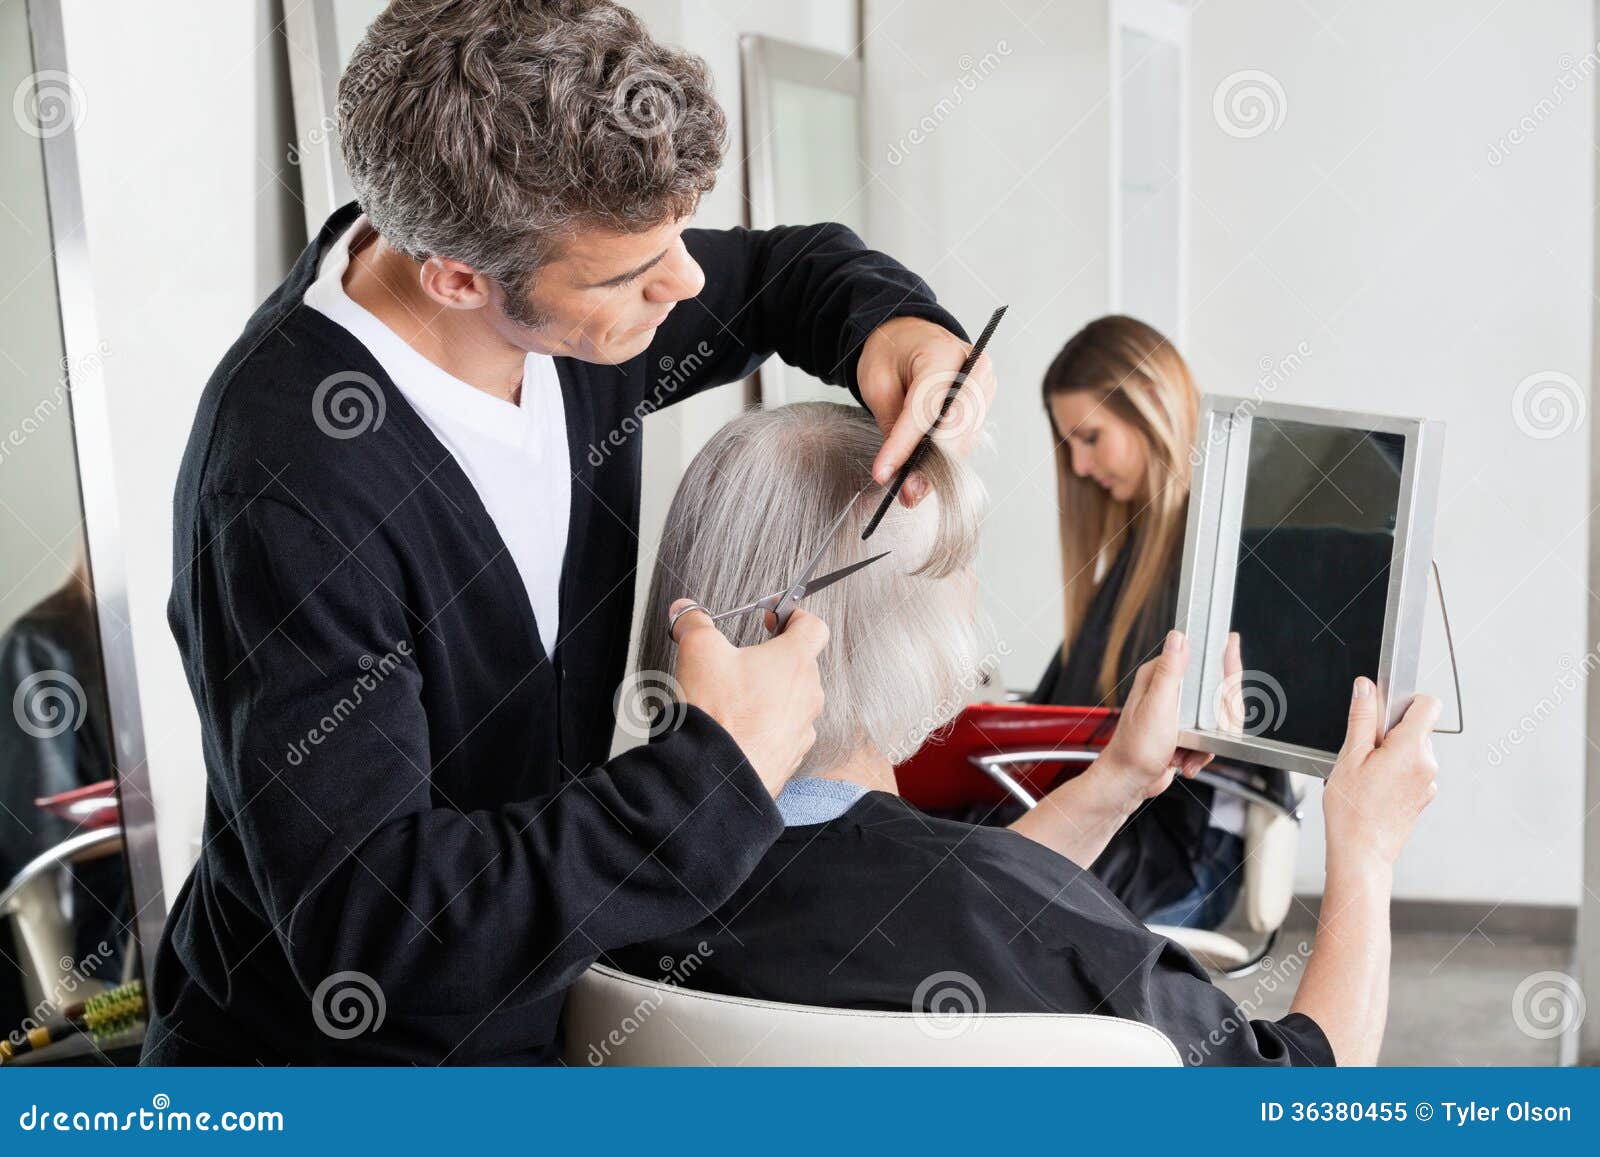 Hairdresser Cutting Client's Hair At Salon Stock Image 